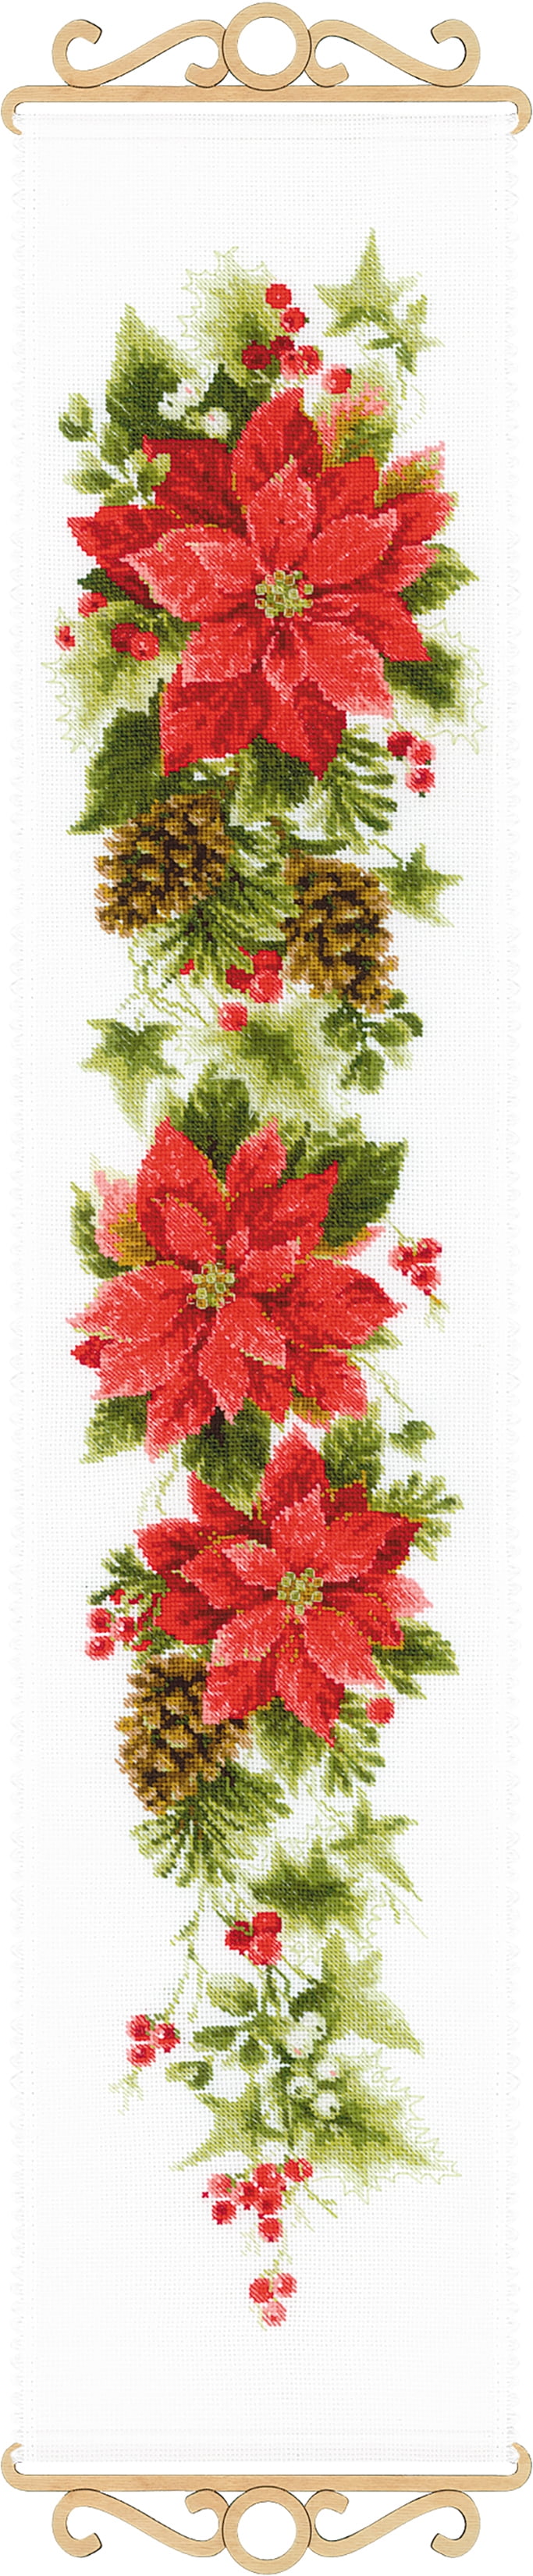 Riolis Counted Cross Stitch Kit 7.5 inchx35.5 inch-Poinsettia (14 Count)